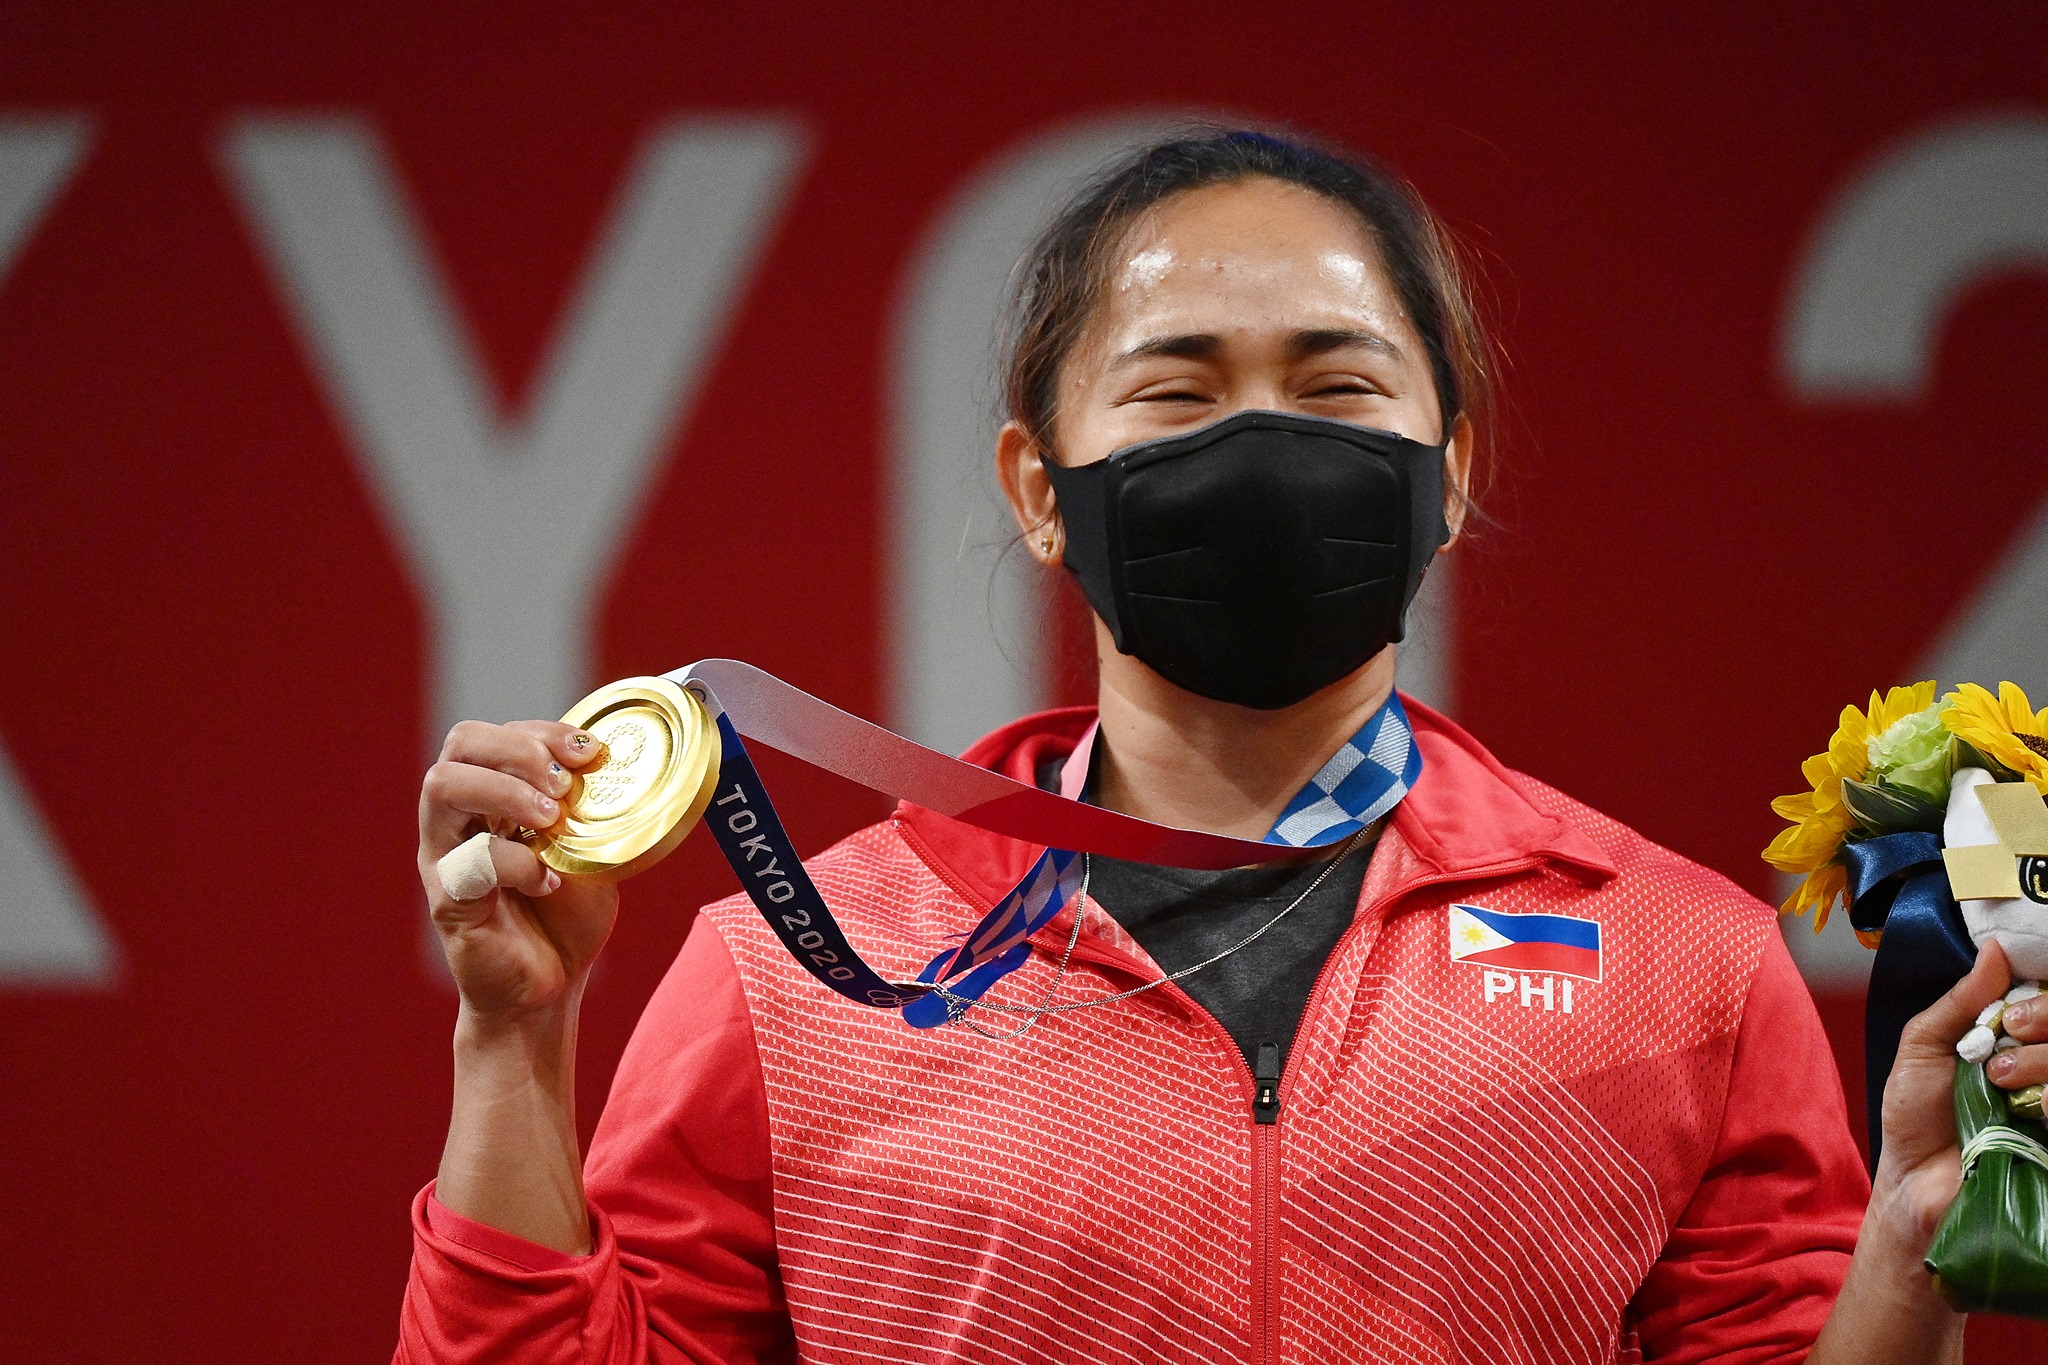 Weightlifter Hidilyn Diaz wins first-ever gold for Philippines, ending 97-year drought